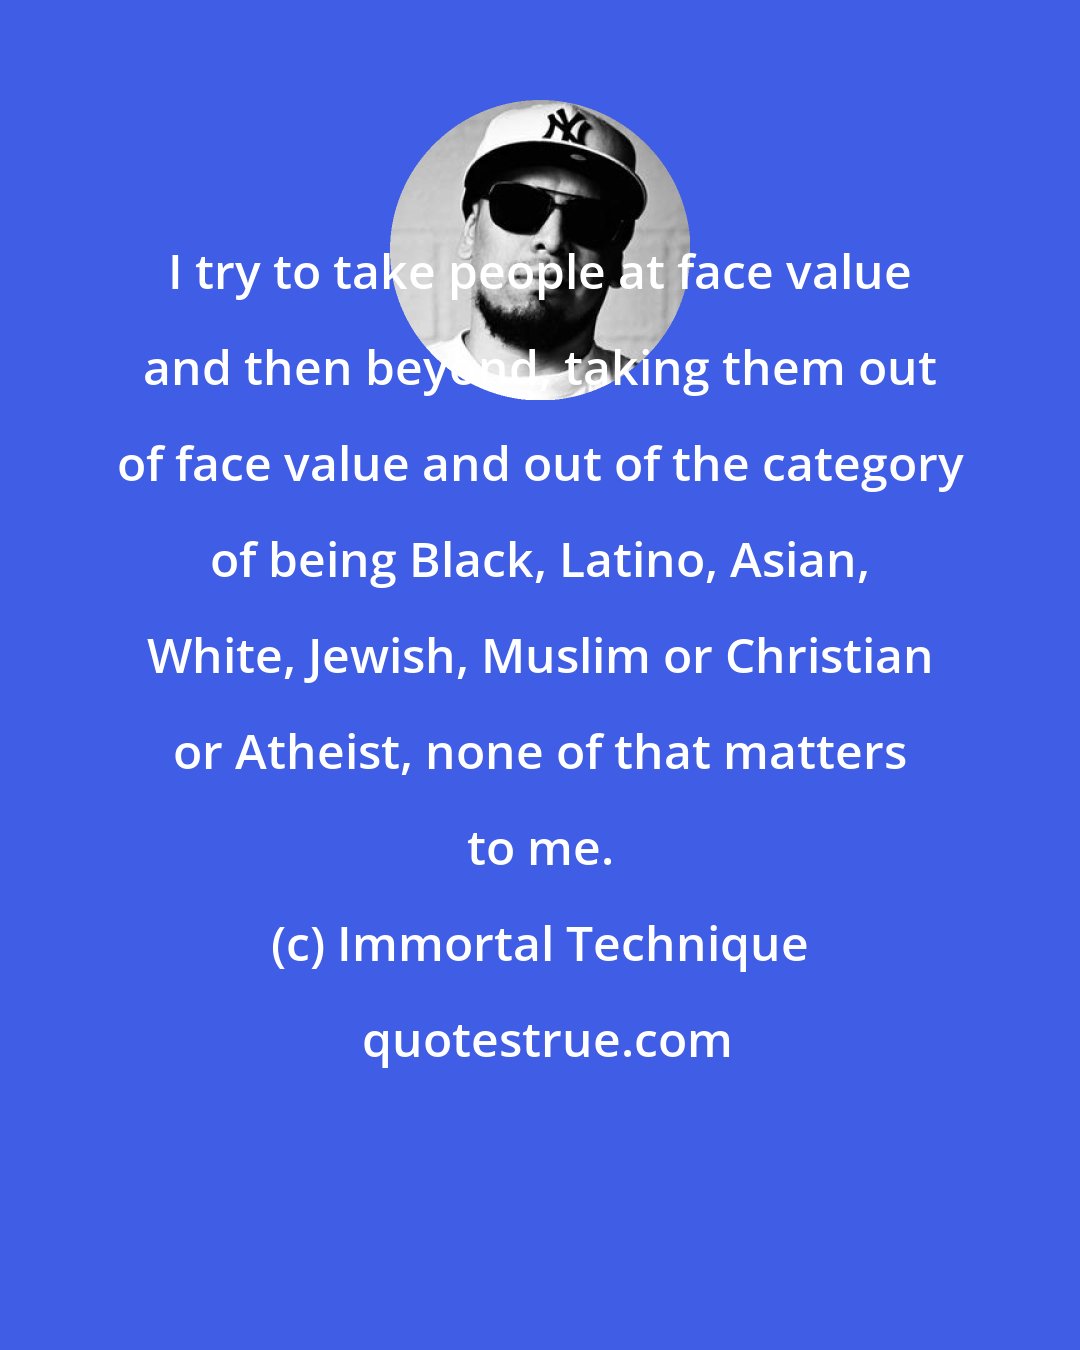 Immortal Technique: I try to take people at face value and then beyond, taking them out of face value and out of the category of being Black, Latino, Asian, White, Jewish, Muslim or Christian or Atheist, none of that matters to me.